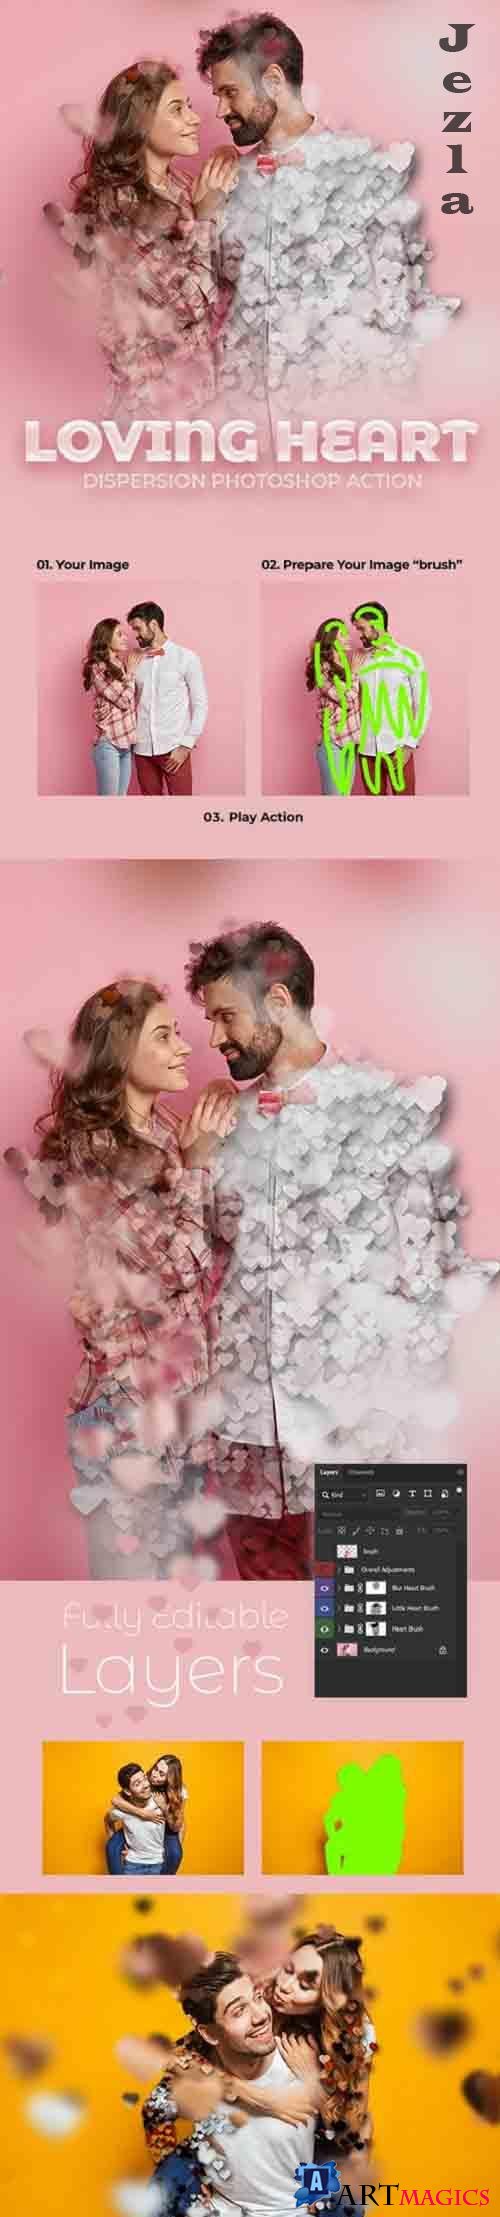 GraphicRiver - Loving Heart Dispersion Photoshop Action 30404701